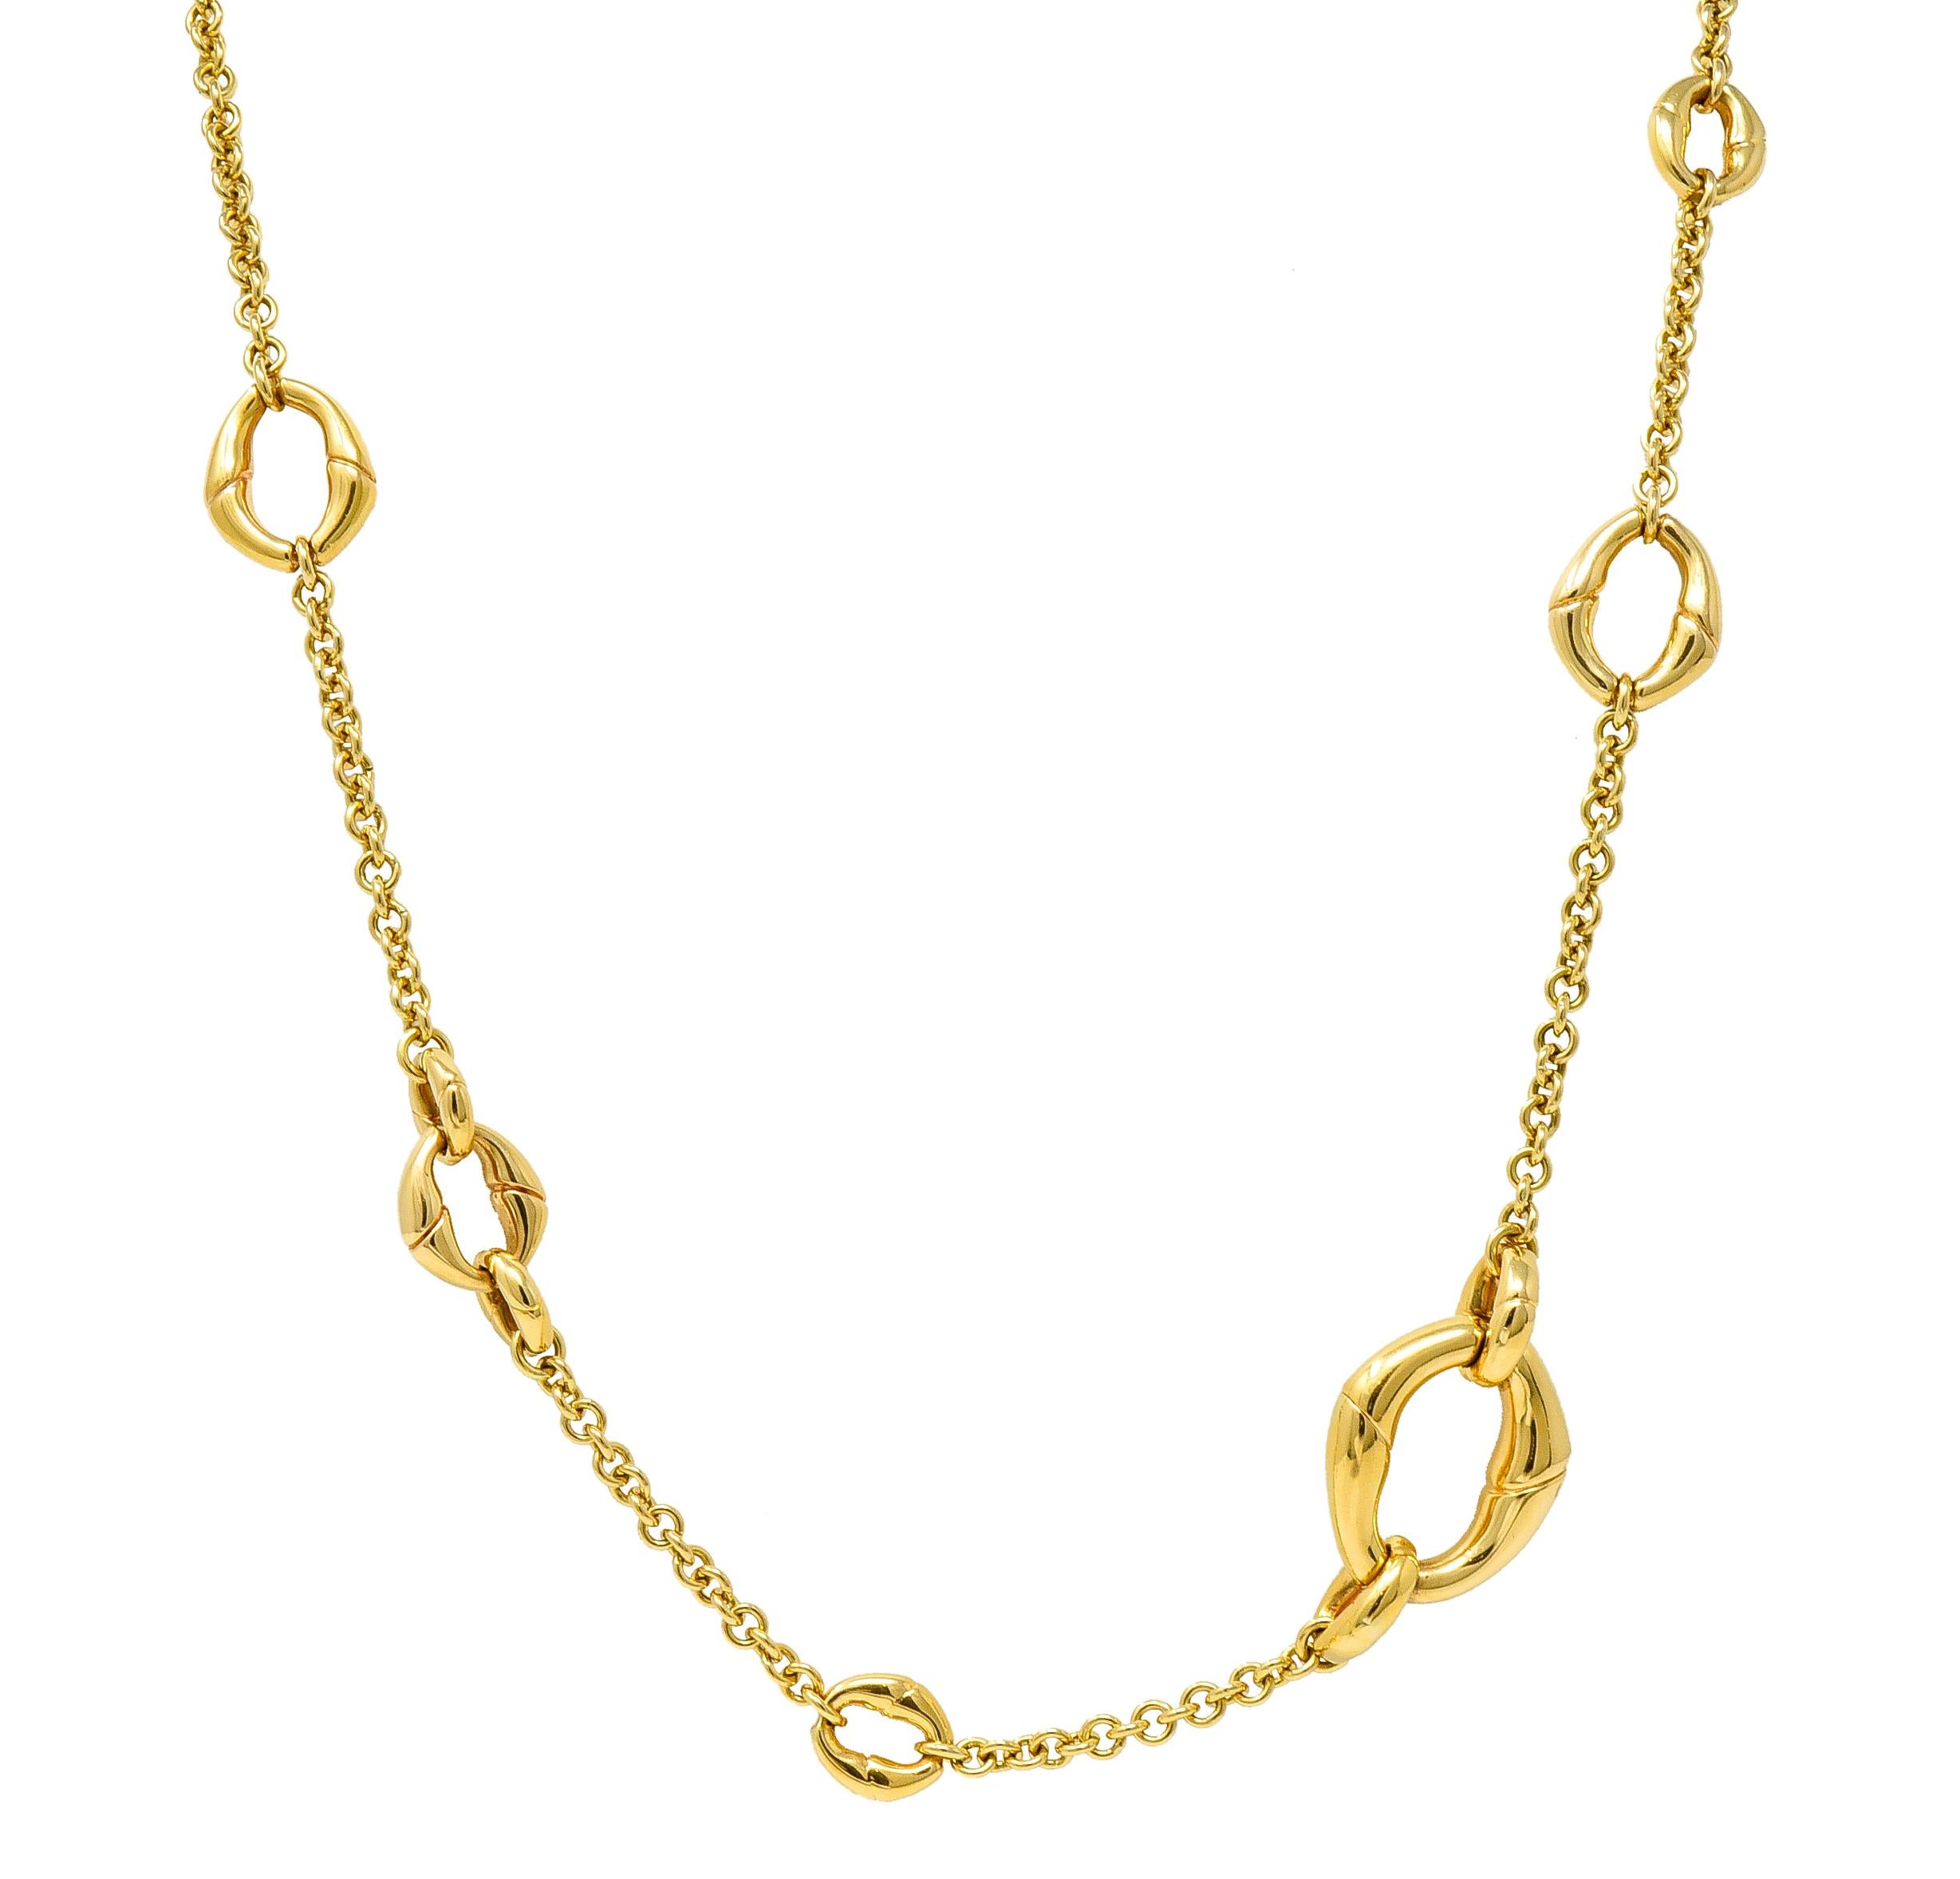 Gucci Contemporary 18 Karat Yellow Gold Bamboo Link Station Necklace 4